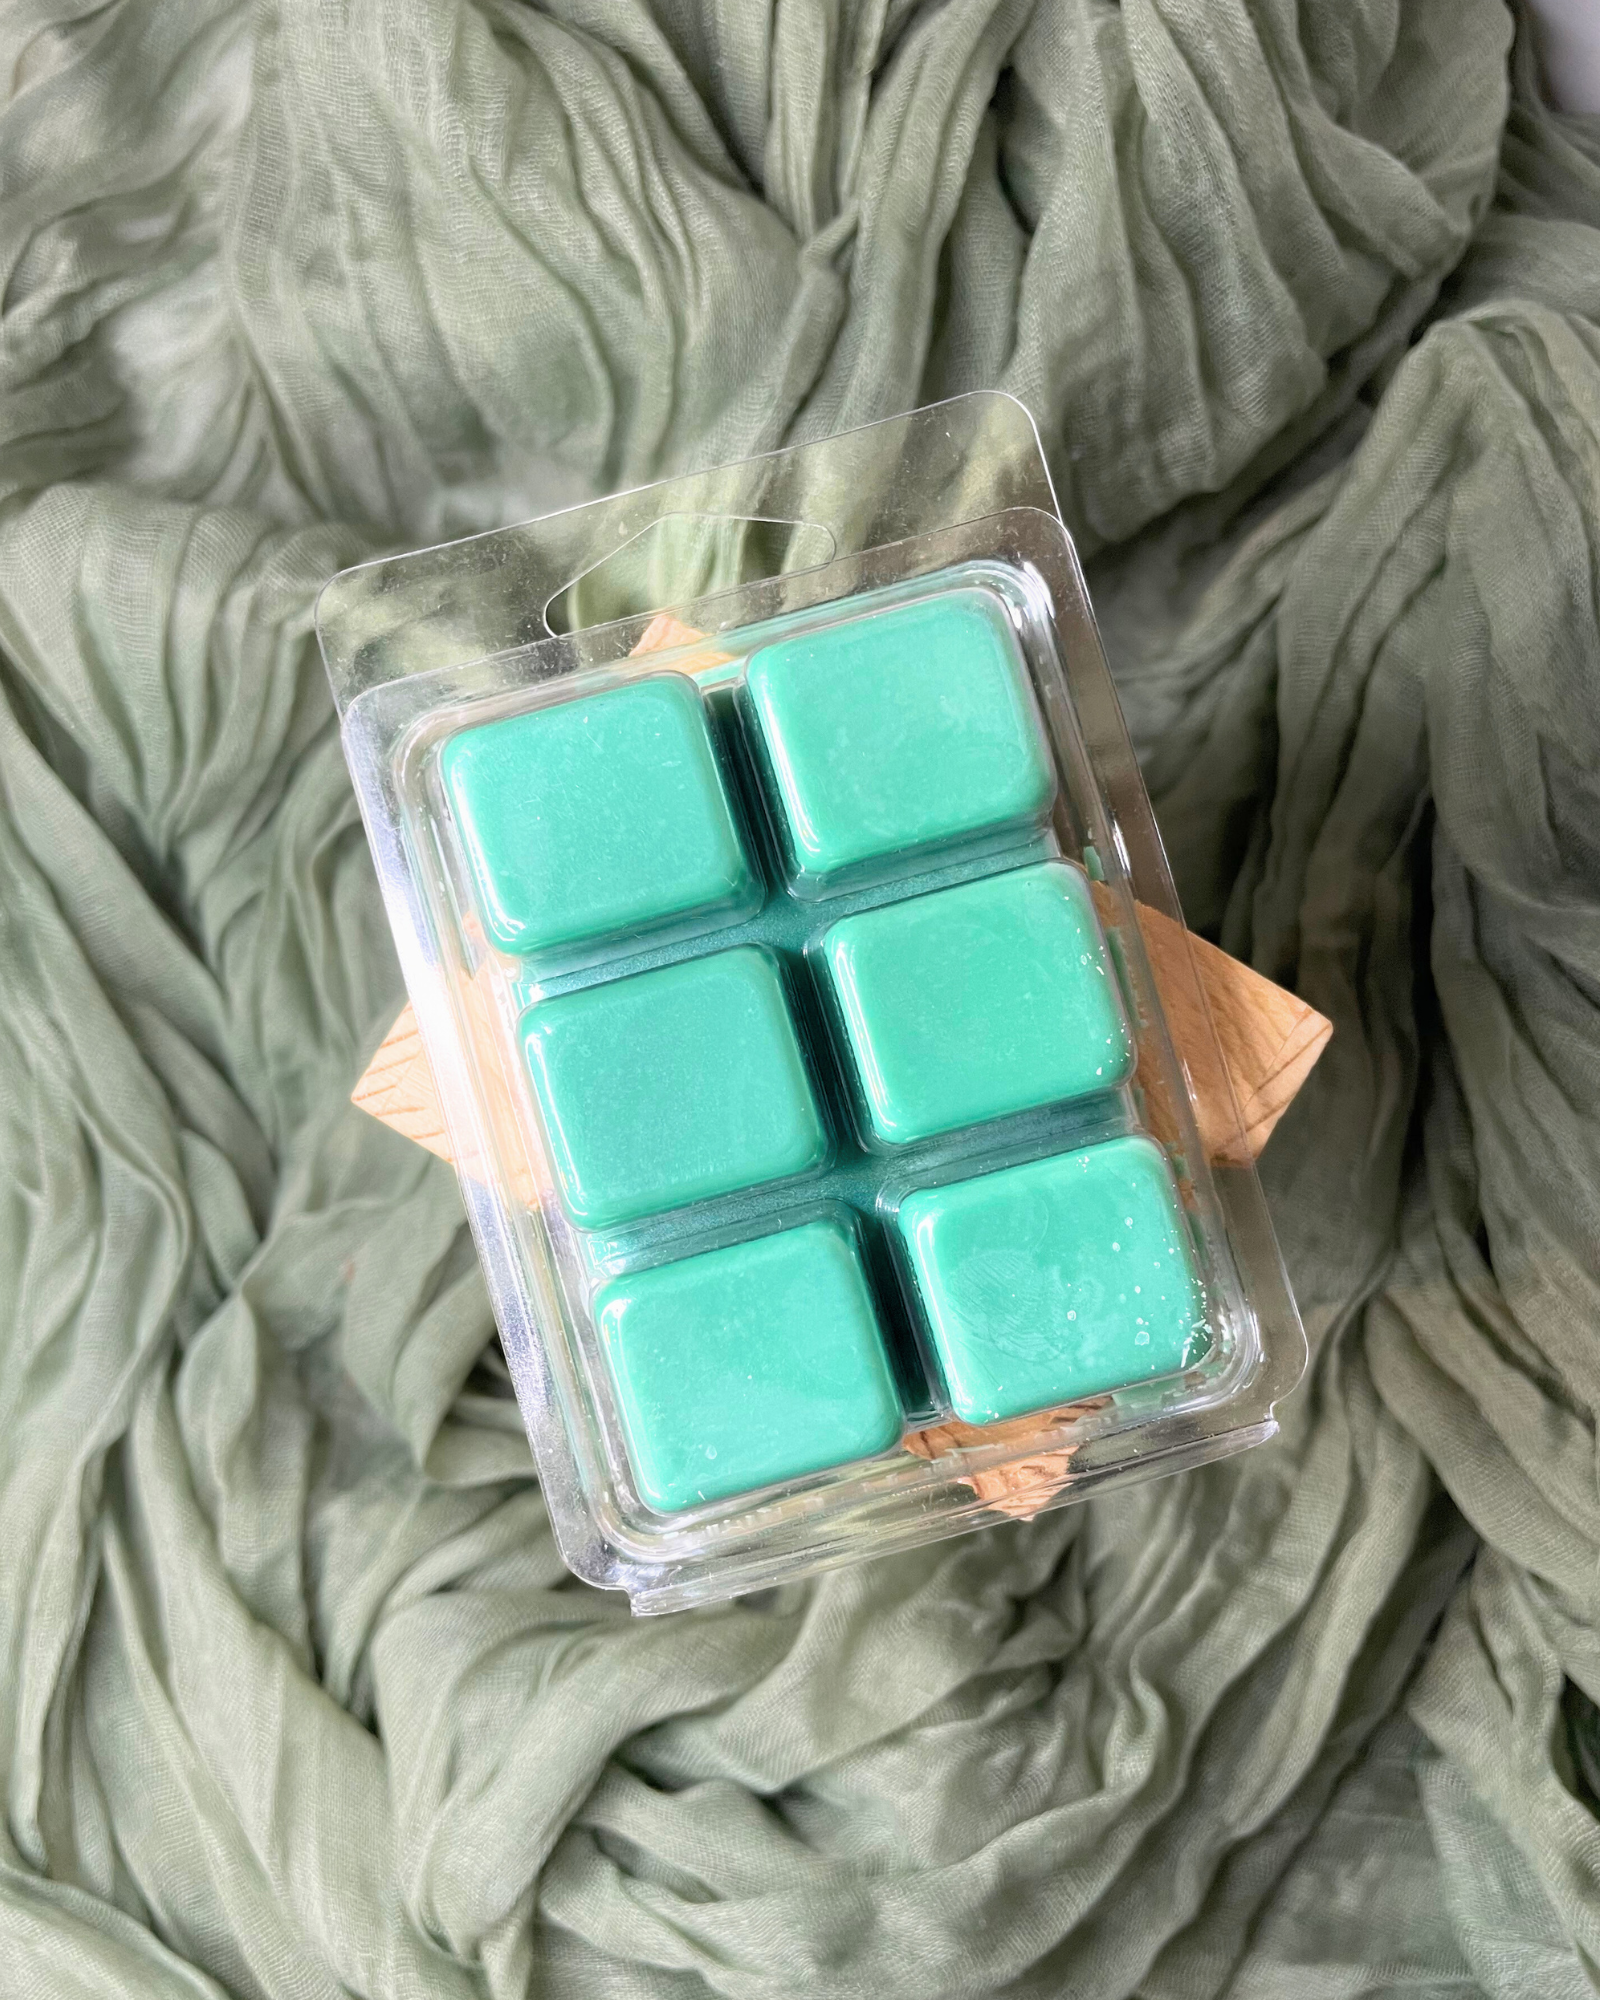 Experience the soothing and clean aroma of Eucalyptus Sage Soy Wax Melts. This unique blend of eucalyptus and woody sage creates an herbal scent that's complemented by a refreshing splash of lemon. Perfect for unwinding and clearing your mind, this wax melts is a must-have for anyone seeking relaxation. Let the soothing aroma of eucalyptus and sage transport you to a place of inner peace and tranquility. www.farmhousecharmcandles.com